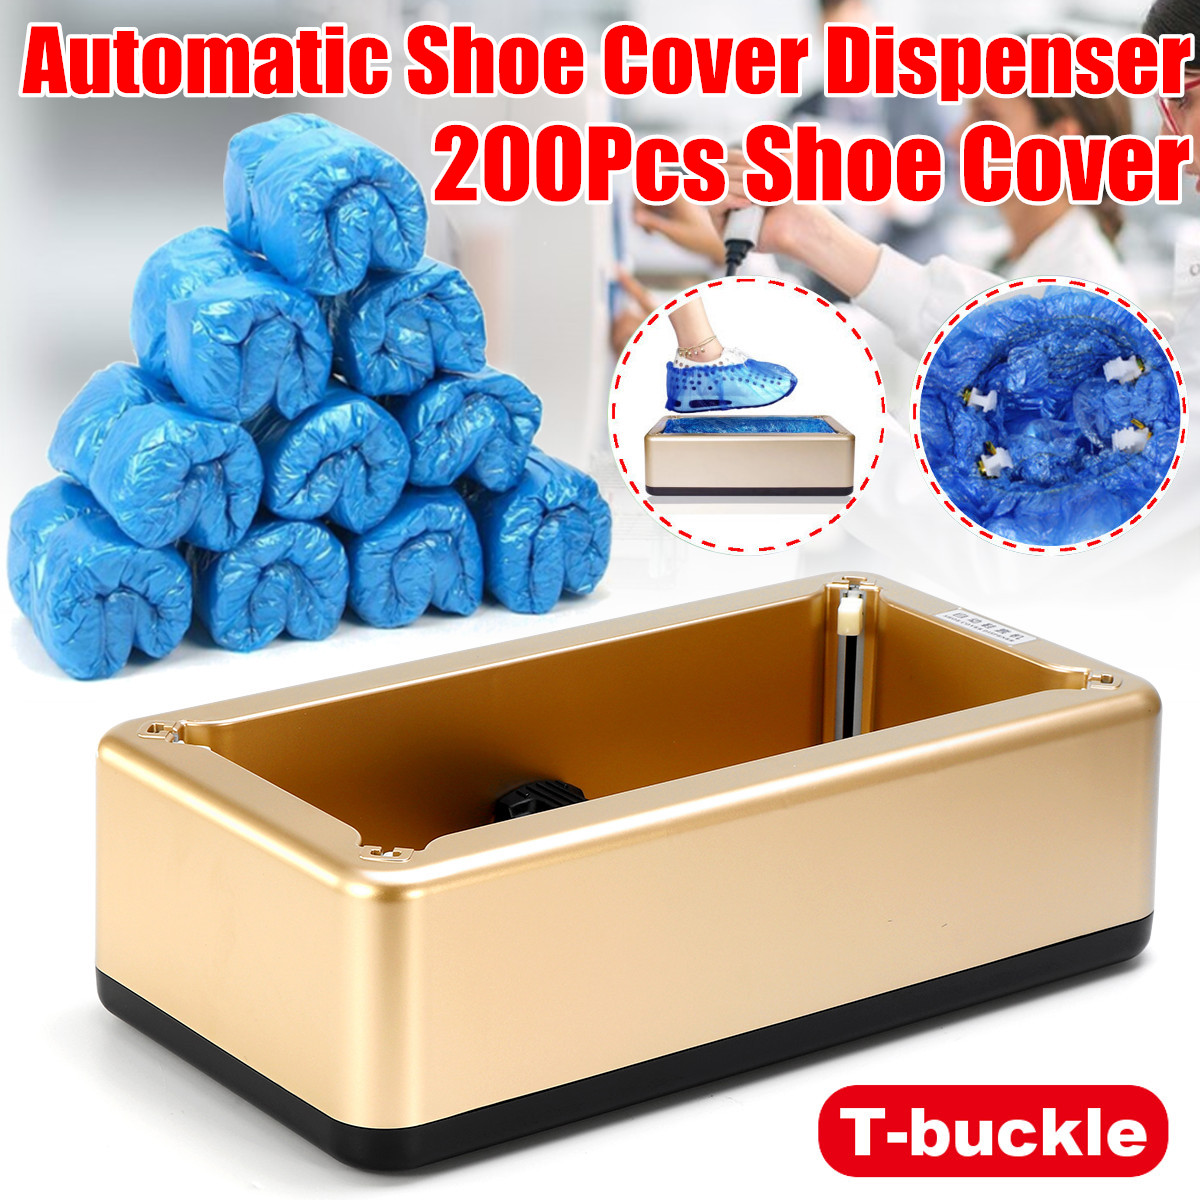 Automatic Shoe Cover Dispenser Shoe Coating Machine with 100pcs Overshoe